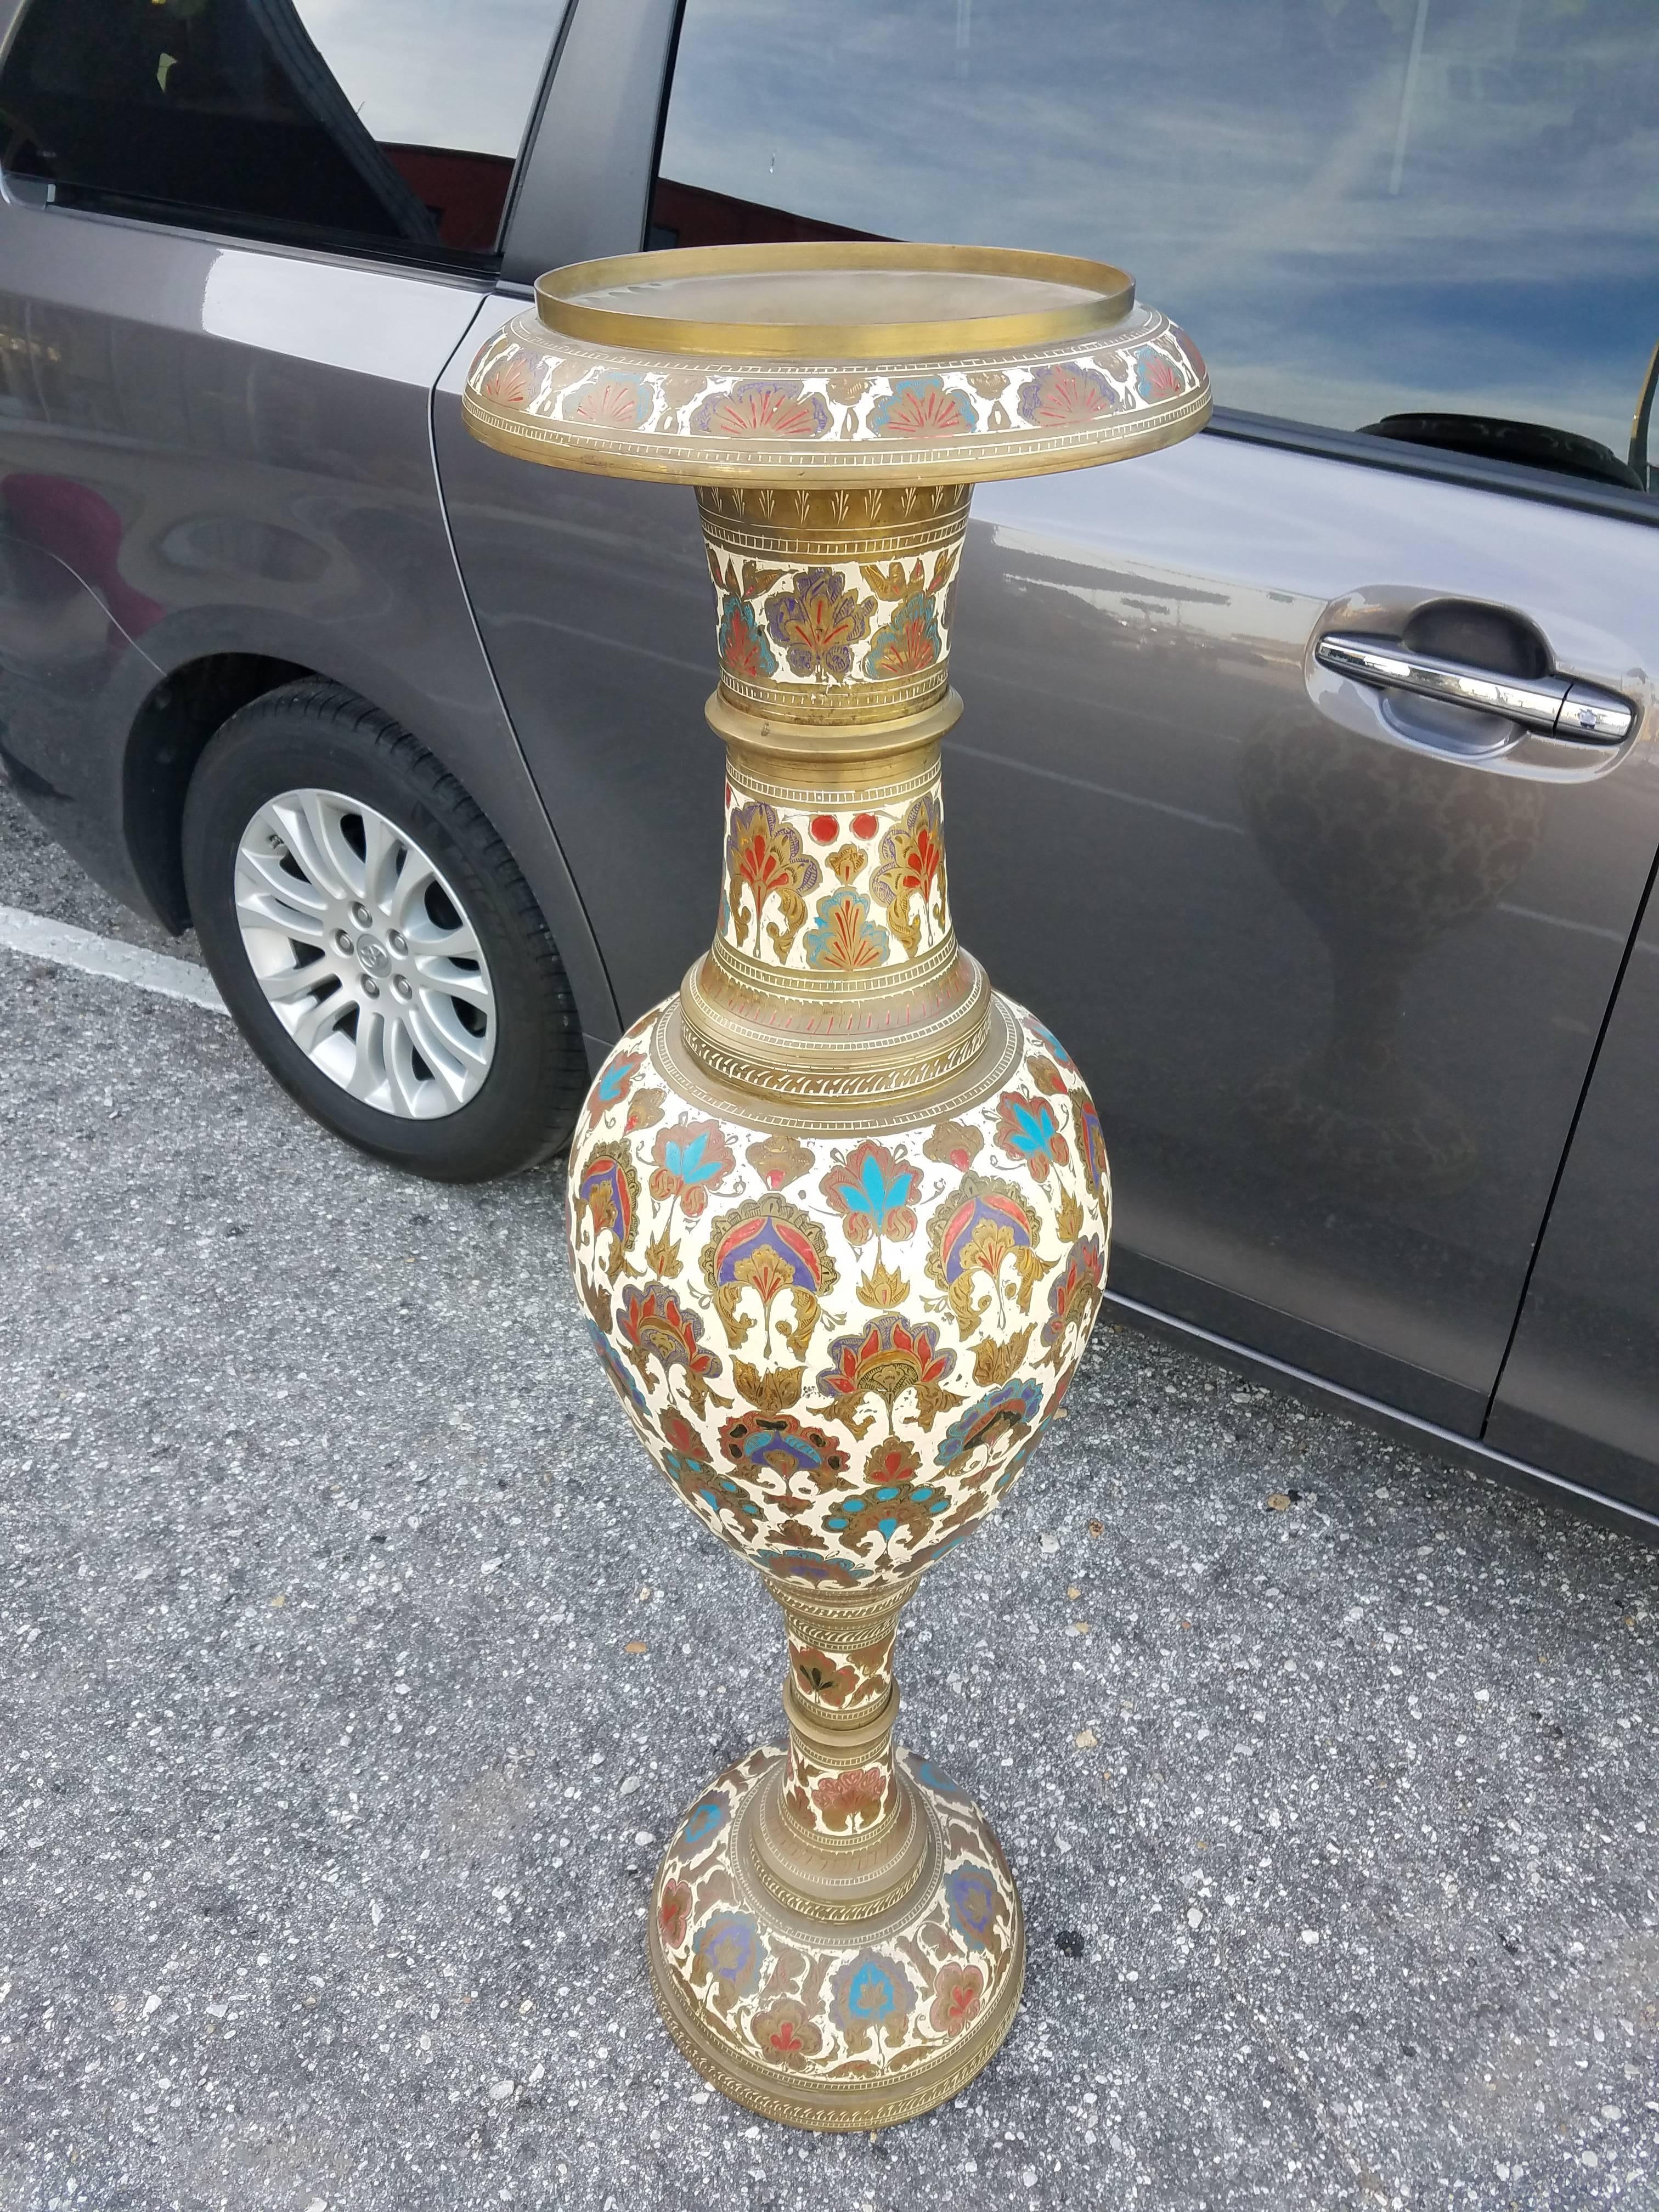 This is a one of a kind Indian imported bronze vase measuring approximately 52